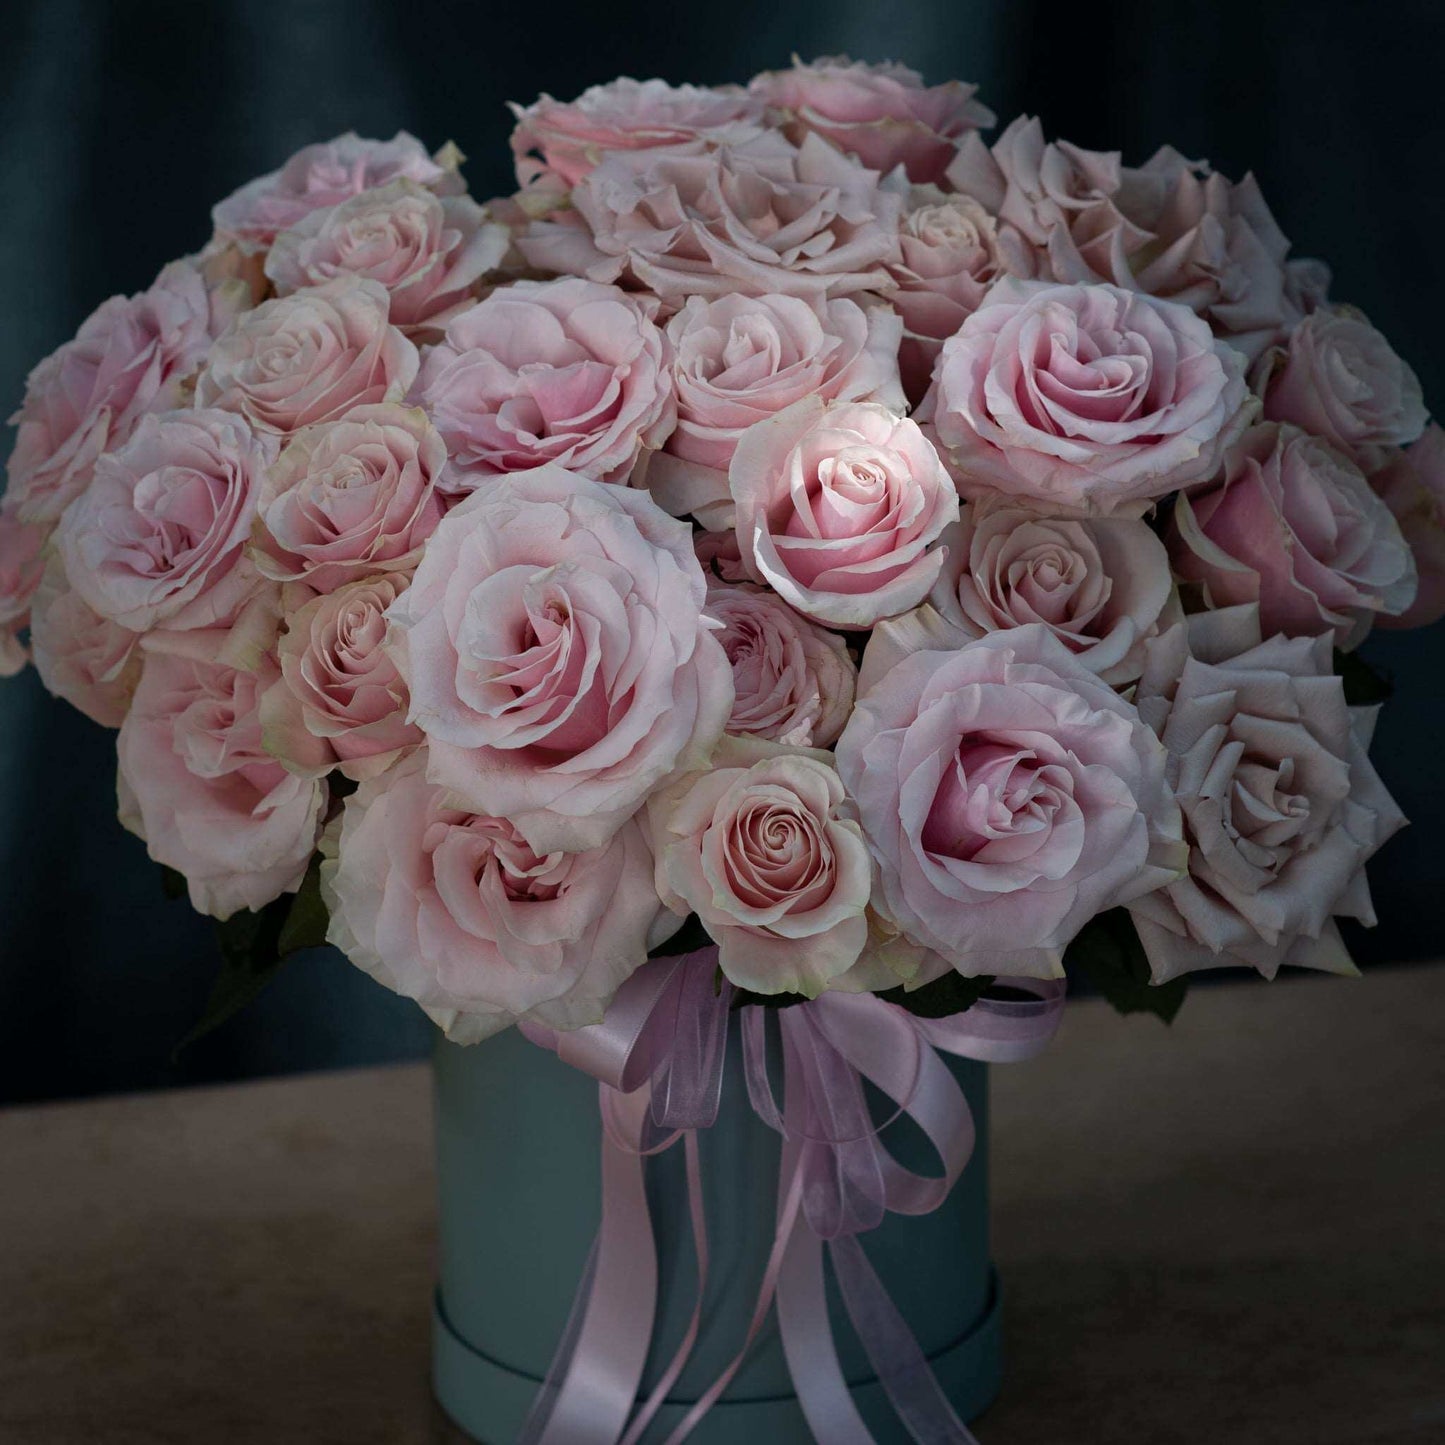 Blush Pink Roses Presented in a Hatbox - Pulbrook and Gould Flowers London